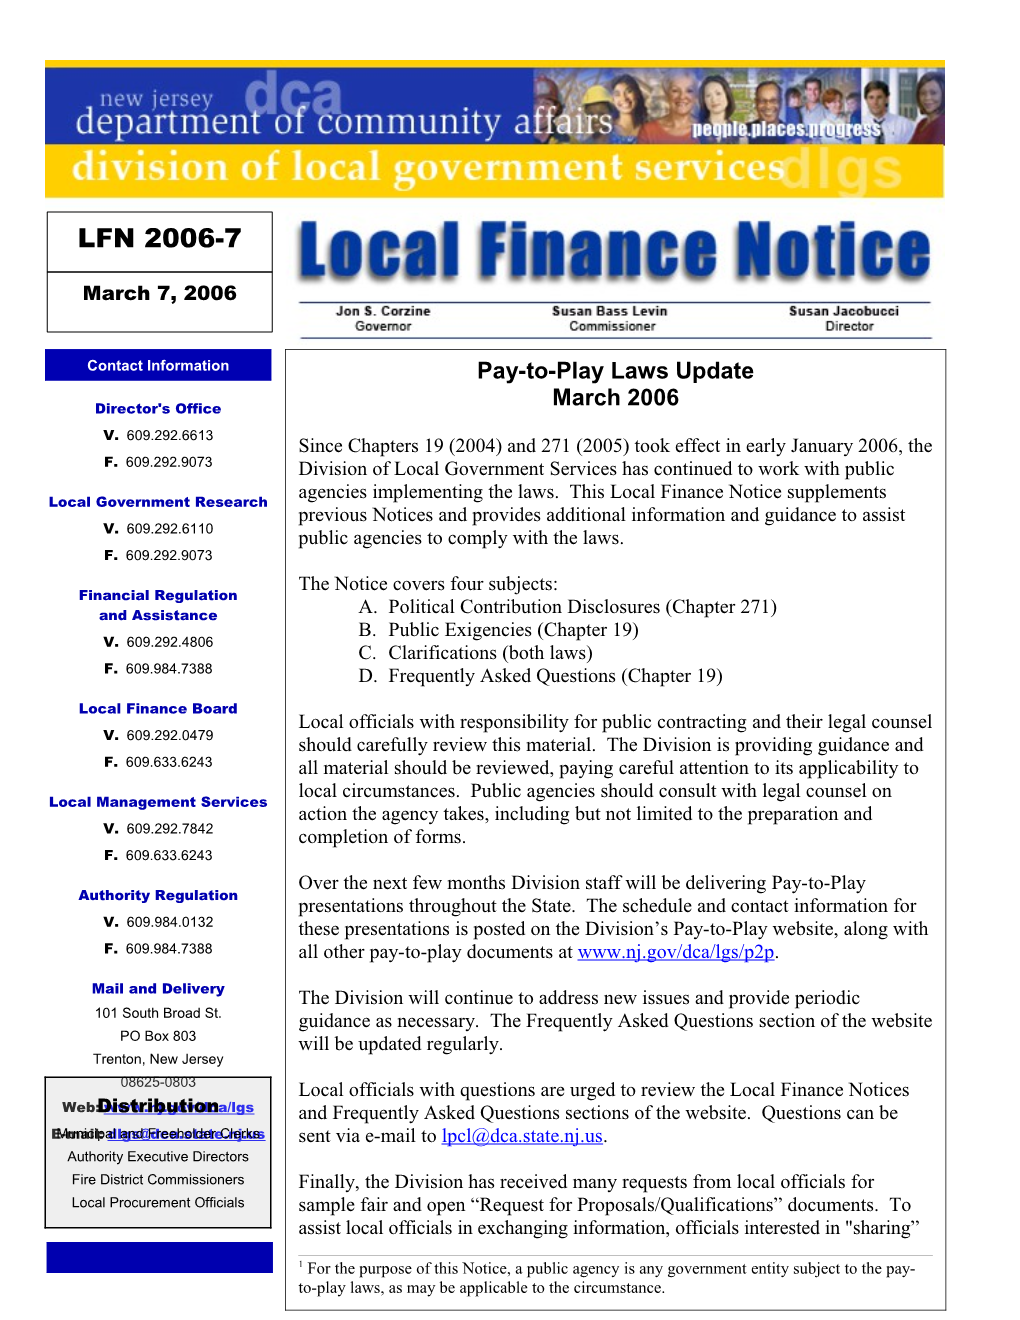 Local Finance Notice 2006-7 March 7, 2006 Page 7